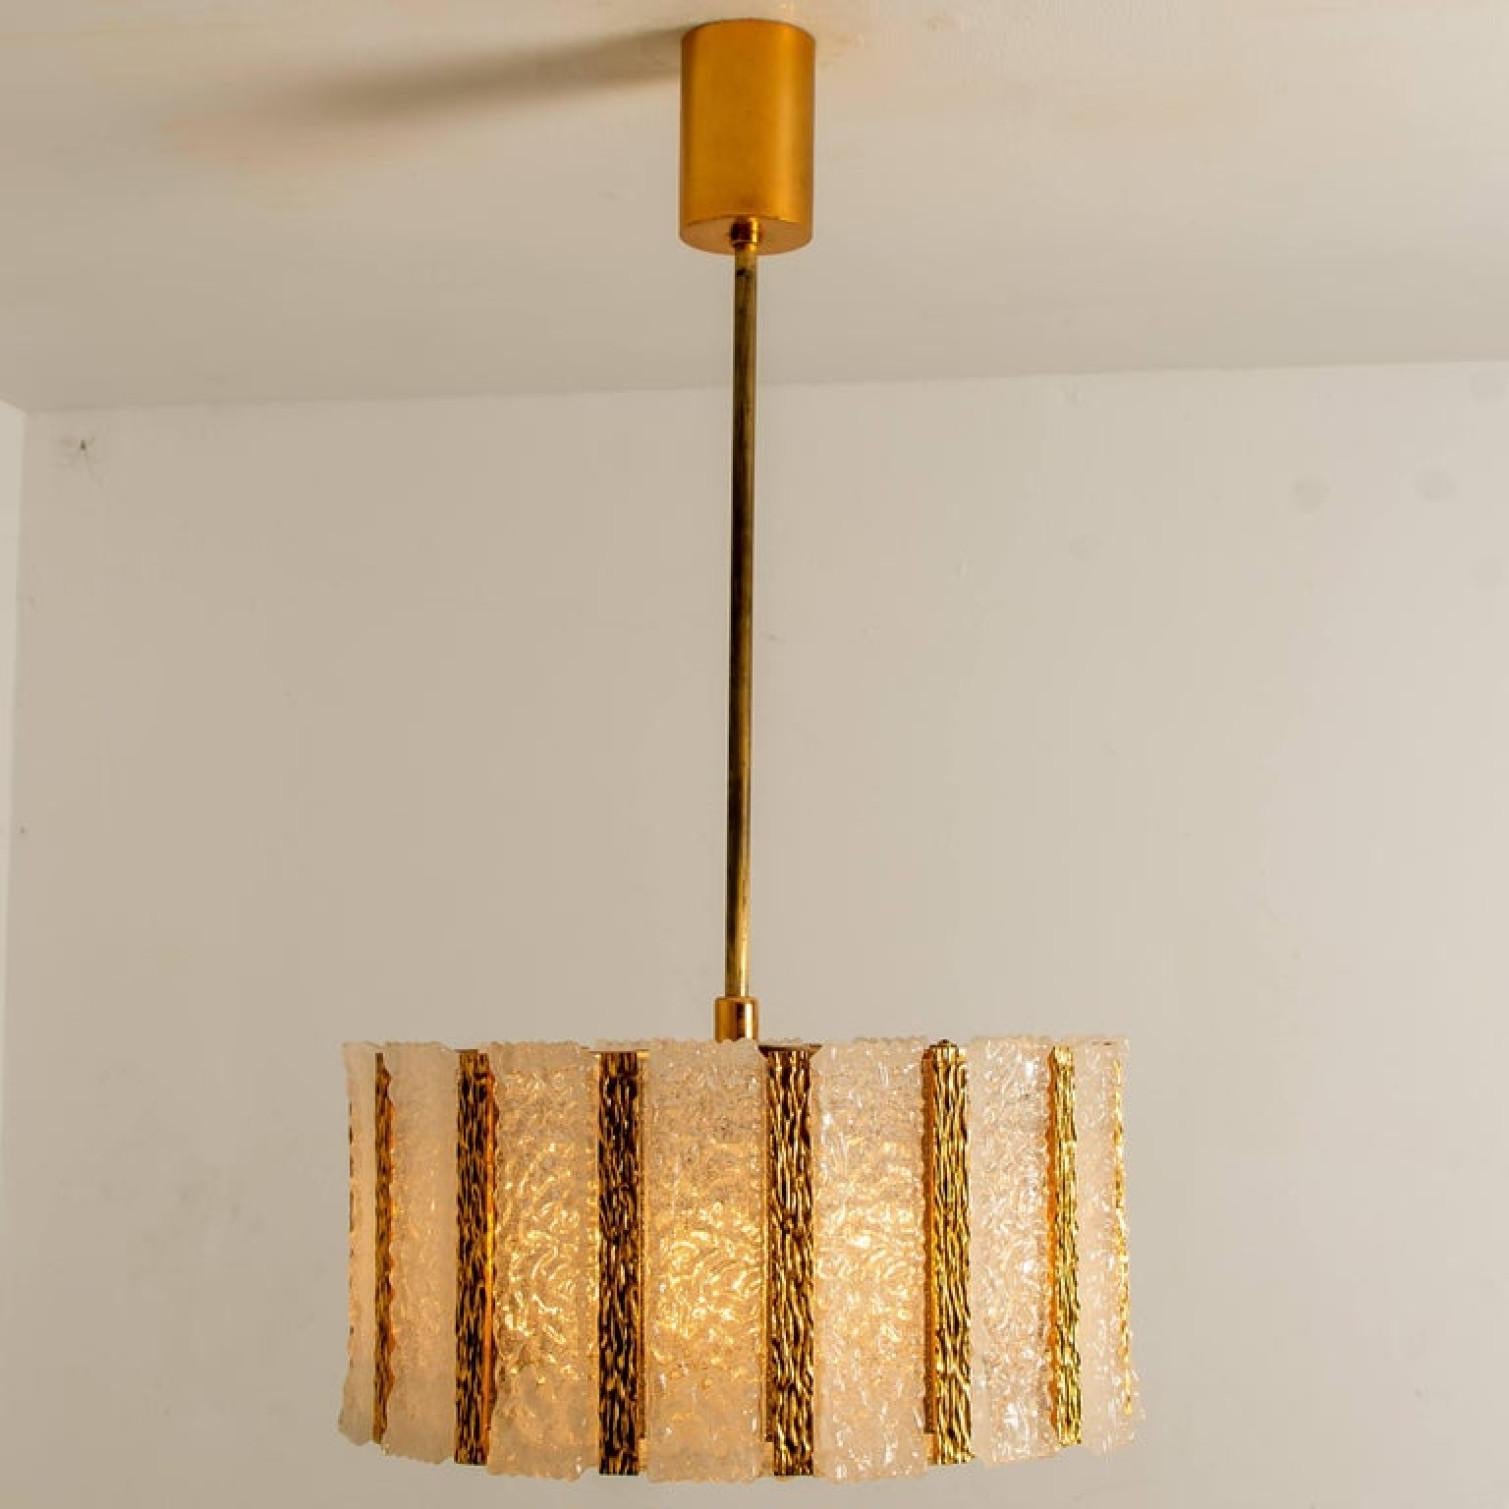 Pair of Gold-Plated Bronze Drum Light Fixtures, 1960s, Austria For Sale 2